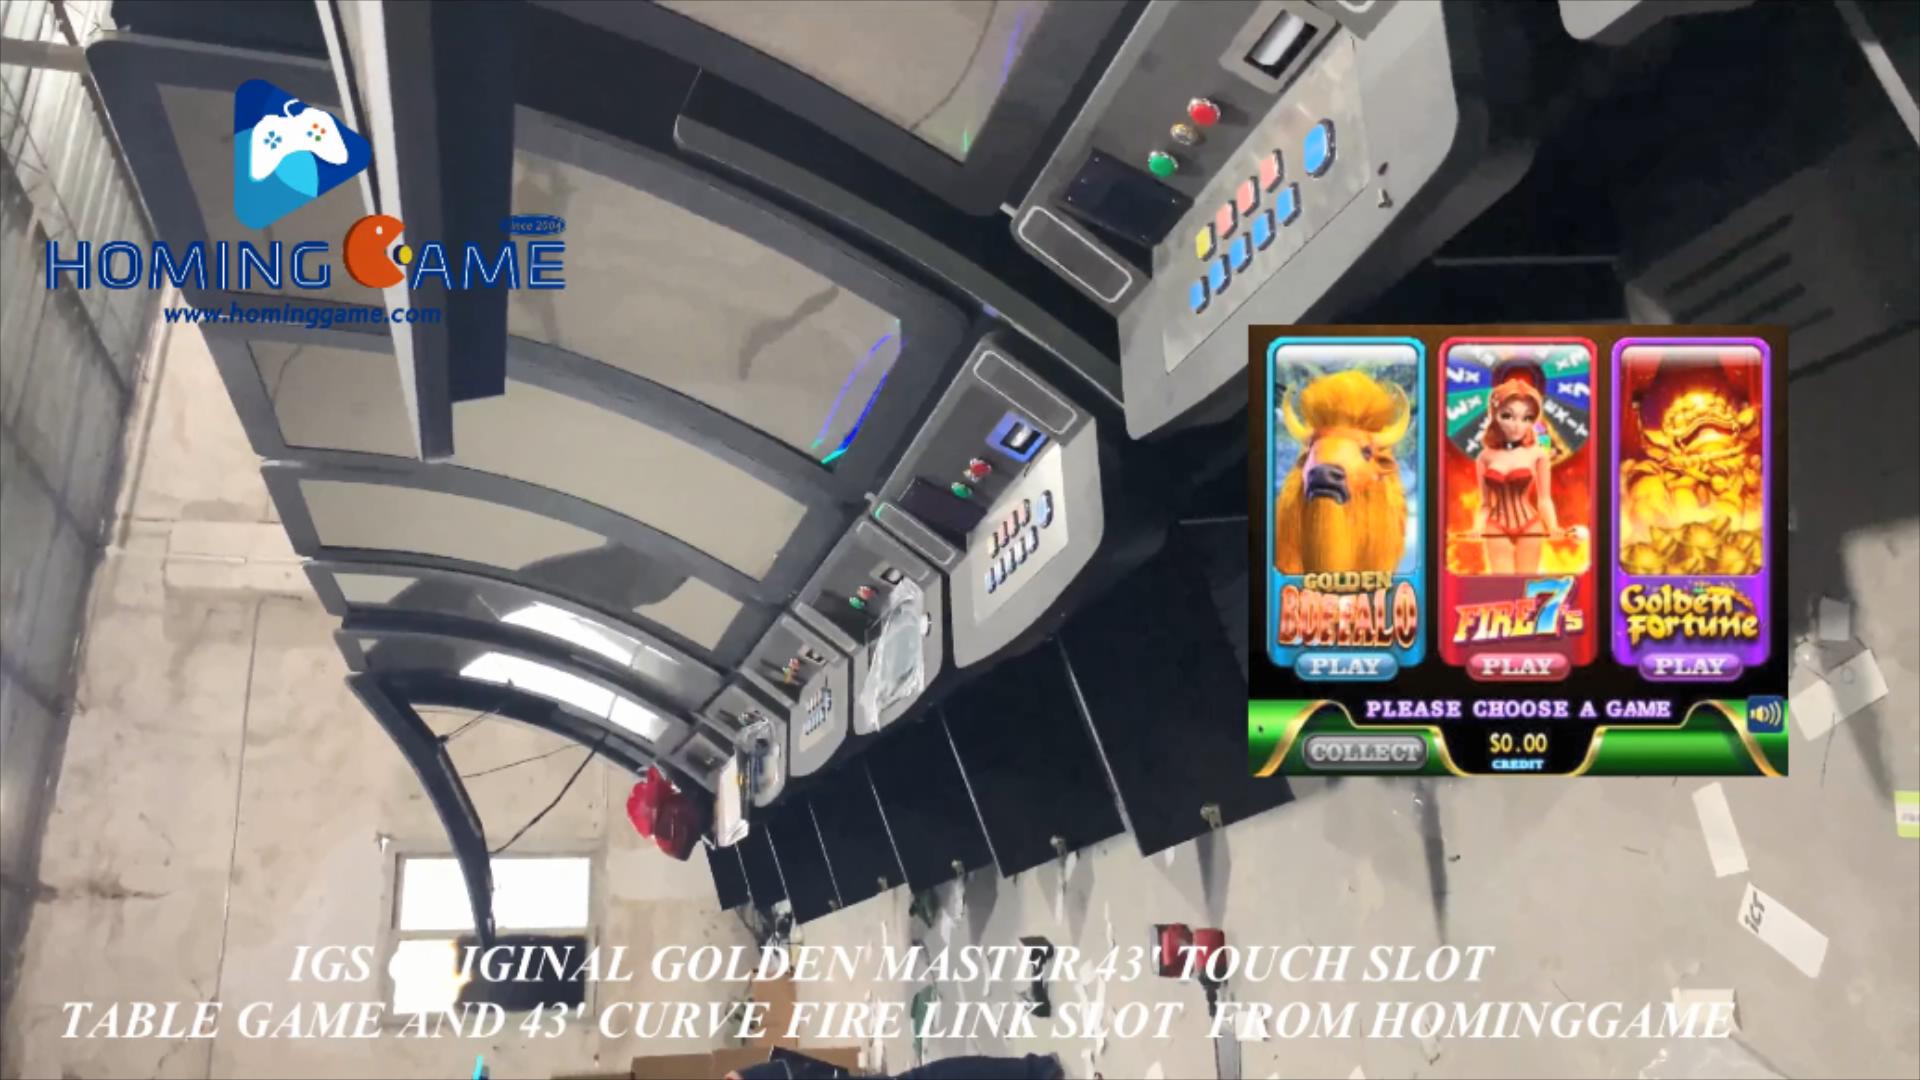 2021 IGS Original Golden Master 3 In 1 43' Touch Screen Slot Table Game Machine USA top Sale Slot Game Machine By HomingGame(Order Call Whatsapp:+8618688409495),igs golden master slot table game machine,golden master slot table gaming machine,golden master,igs golden master touch screen slot table game machine,43' touch monitor 8 in 1 fire link slot table game machine,32' touch monitor 8 in 1 fire link slot table game machine,fire link slot table game,,ultimate fire link,ultimate fire link slot game machine,ultimate fire link slot game,fire link slot game machine,fire link,ultimate fire link slot gaming machine,ultimate fire link slot table gaming machine,slot game,slot table game,slot gaming machine,game machine,arcade game machine,coin operated game machine,arcade game machine for sale,amsuement machine,entertainment game machine,family entertainment game machine,hominggame,www.gametube.hk,indoor game machine,casino,gambling machine,electrical game machine,slot,slot game machine for sale,slot table for sale,simulator game machine,video game machine,video game,video game machine for sale,hominggame fire link slot game,slot gaming